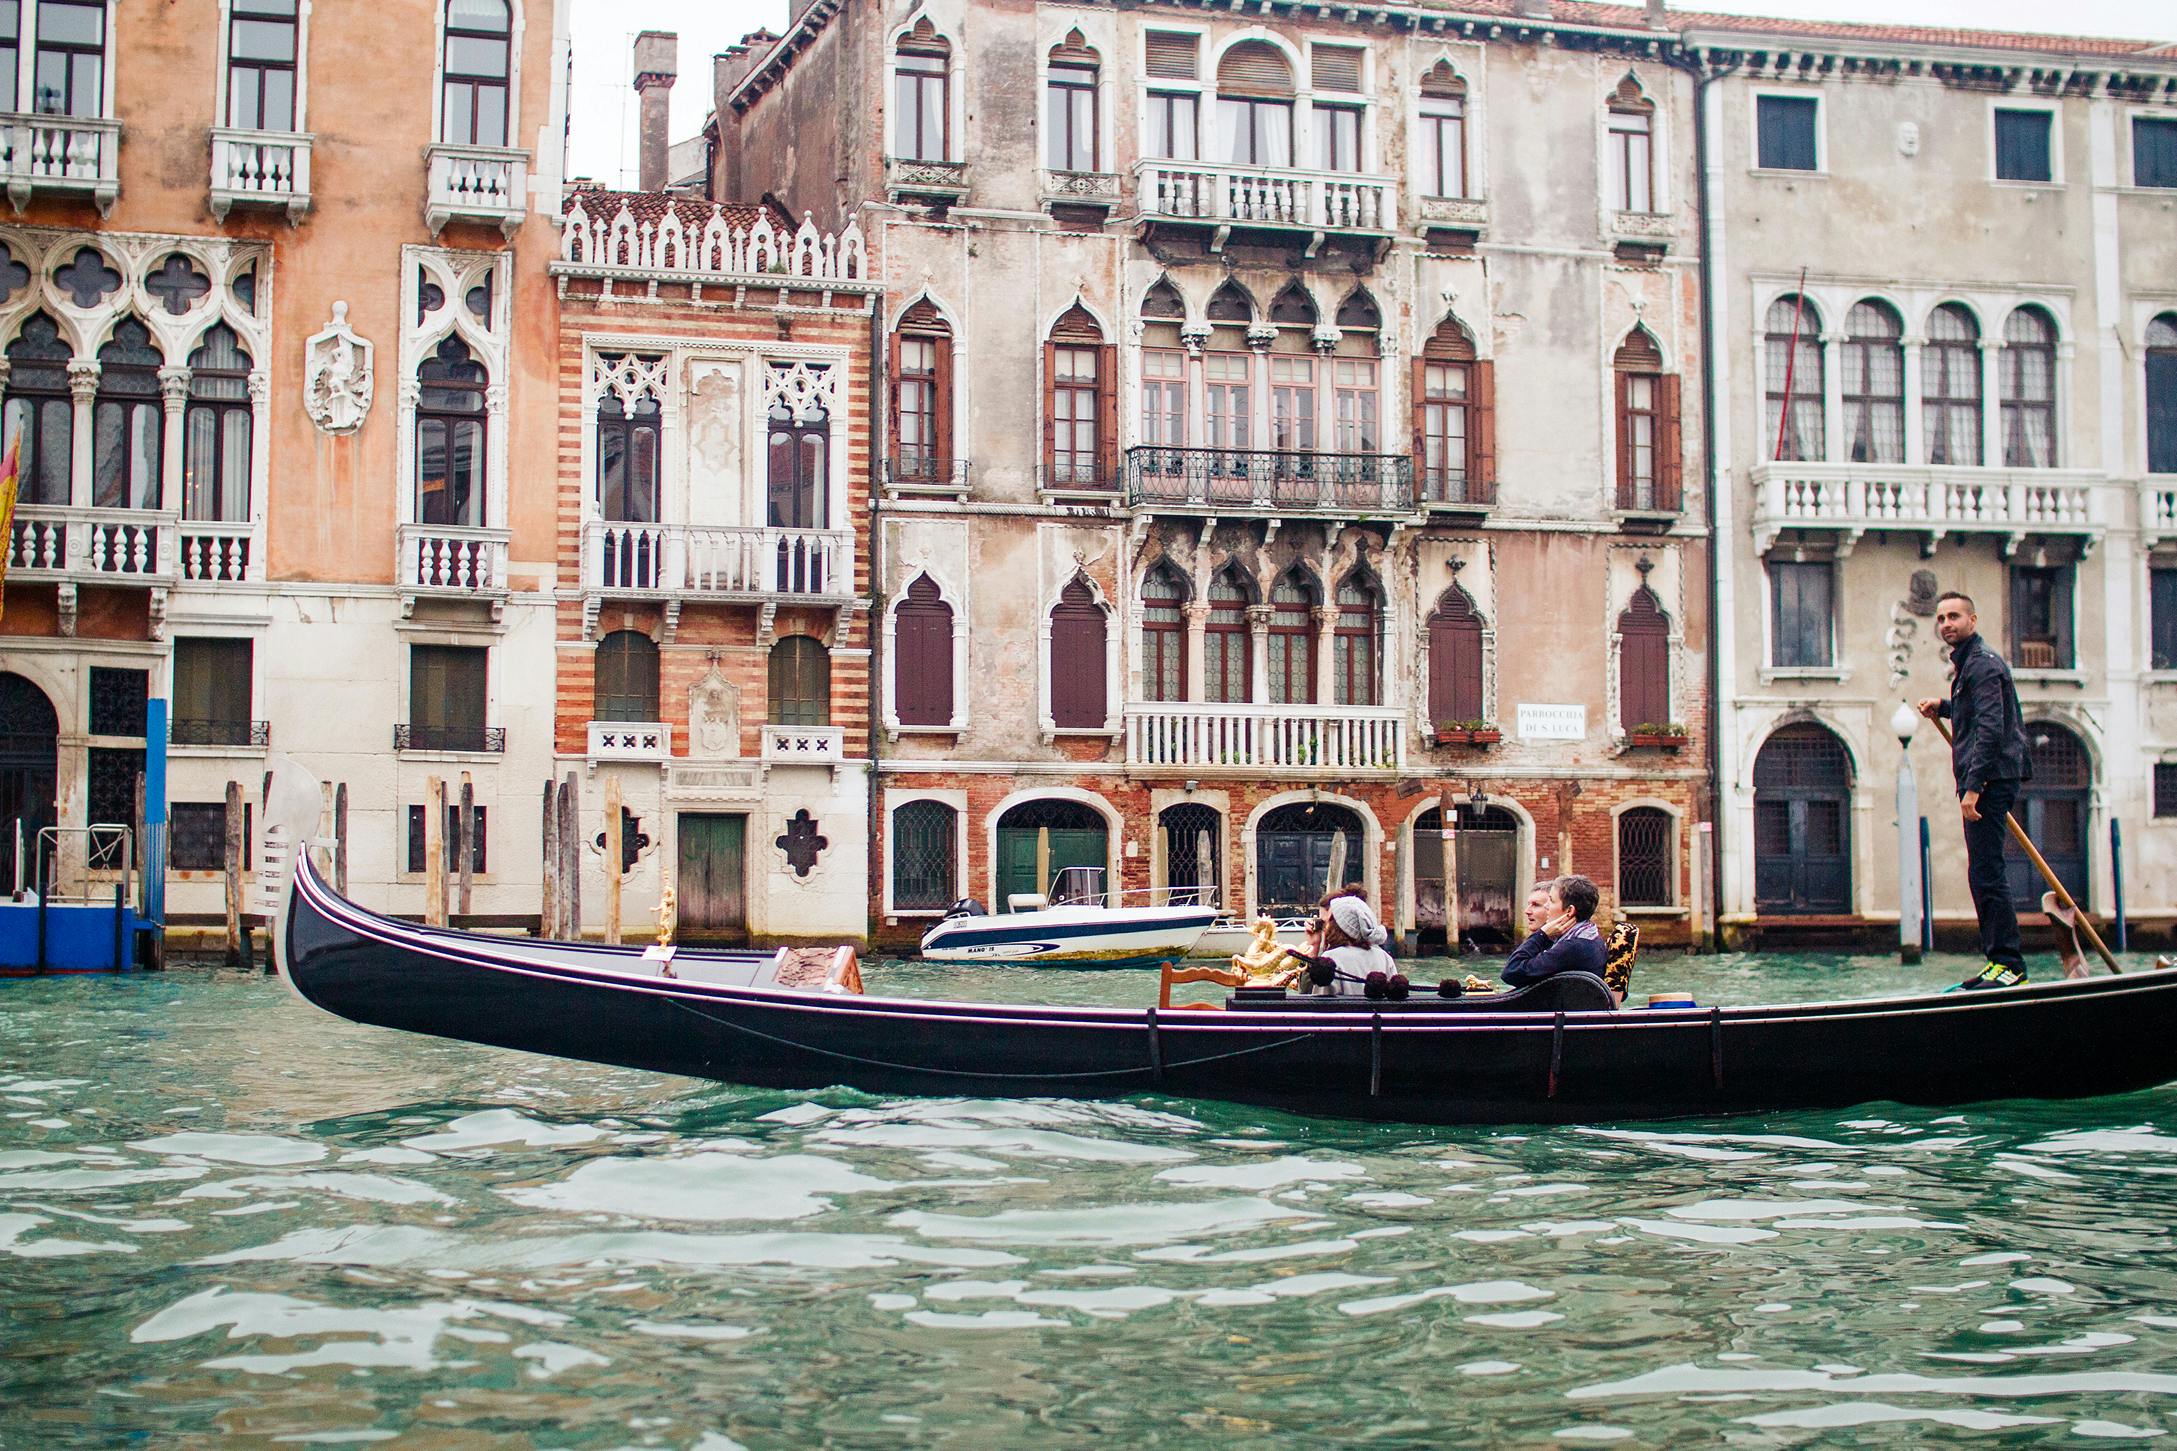 Venice small-group walking tour with gondola ride